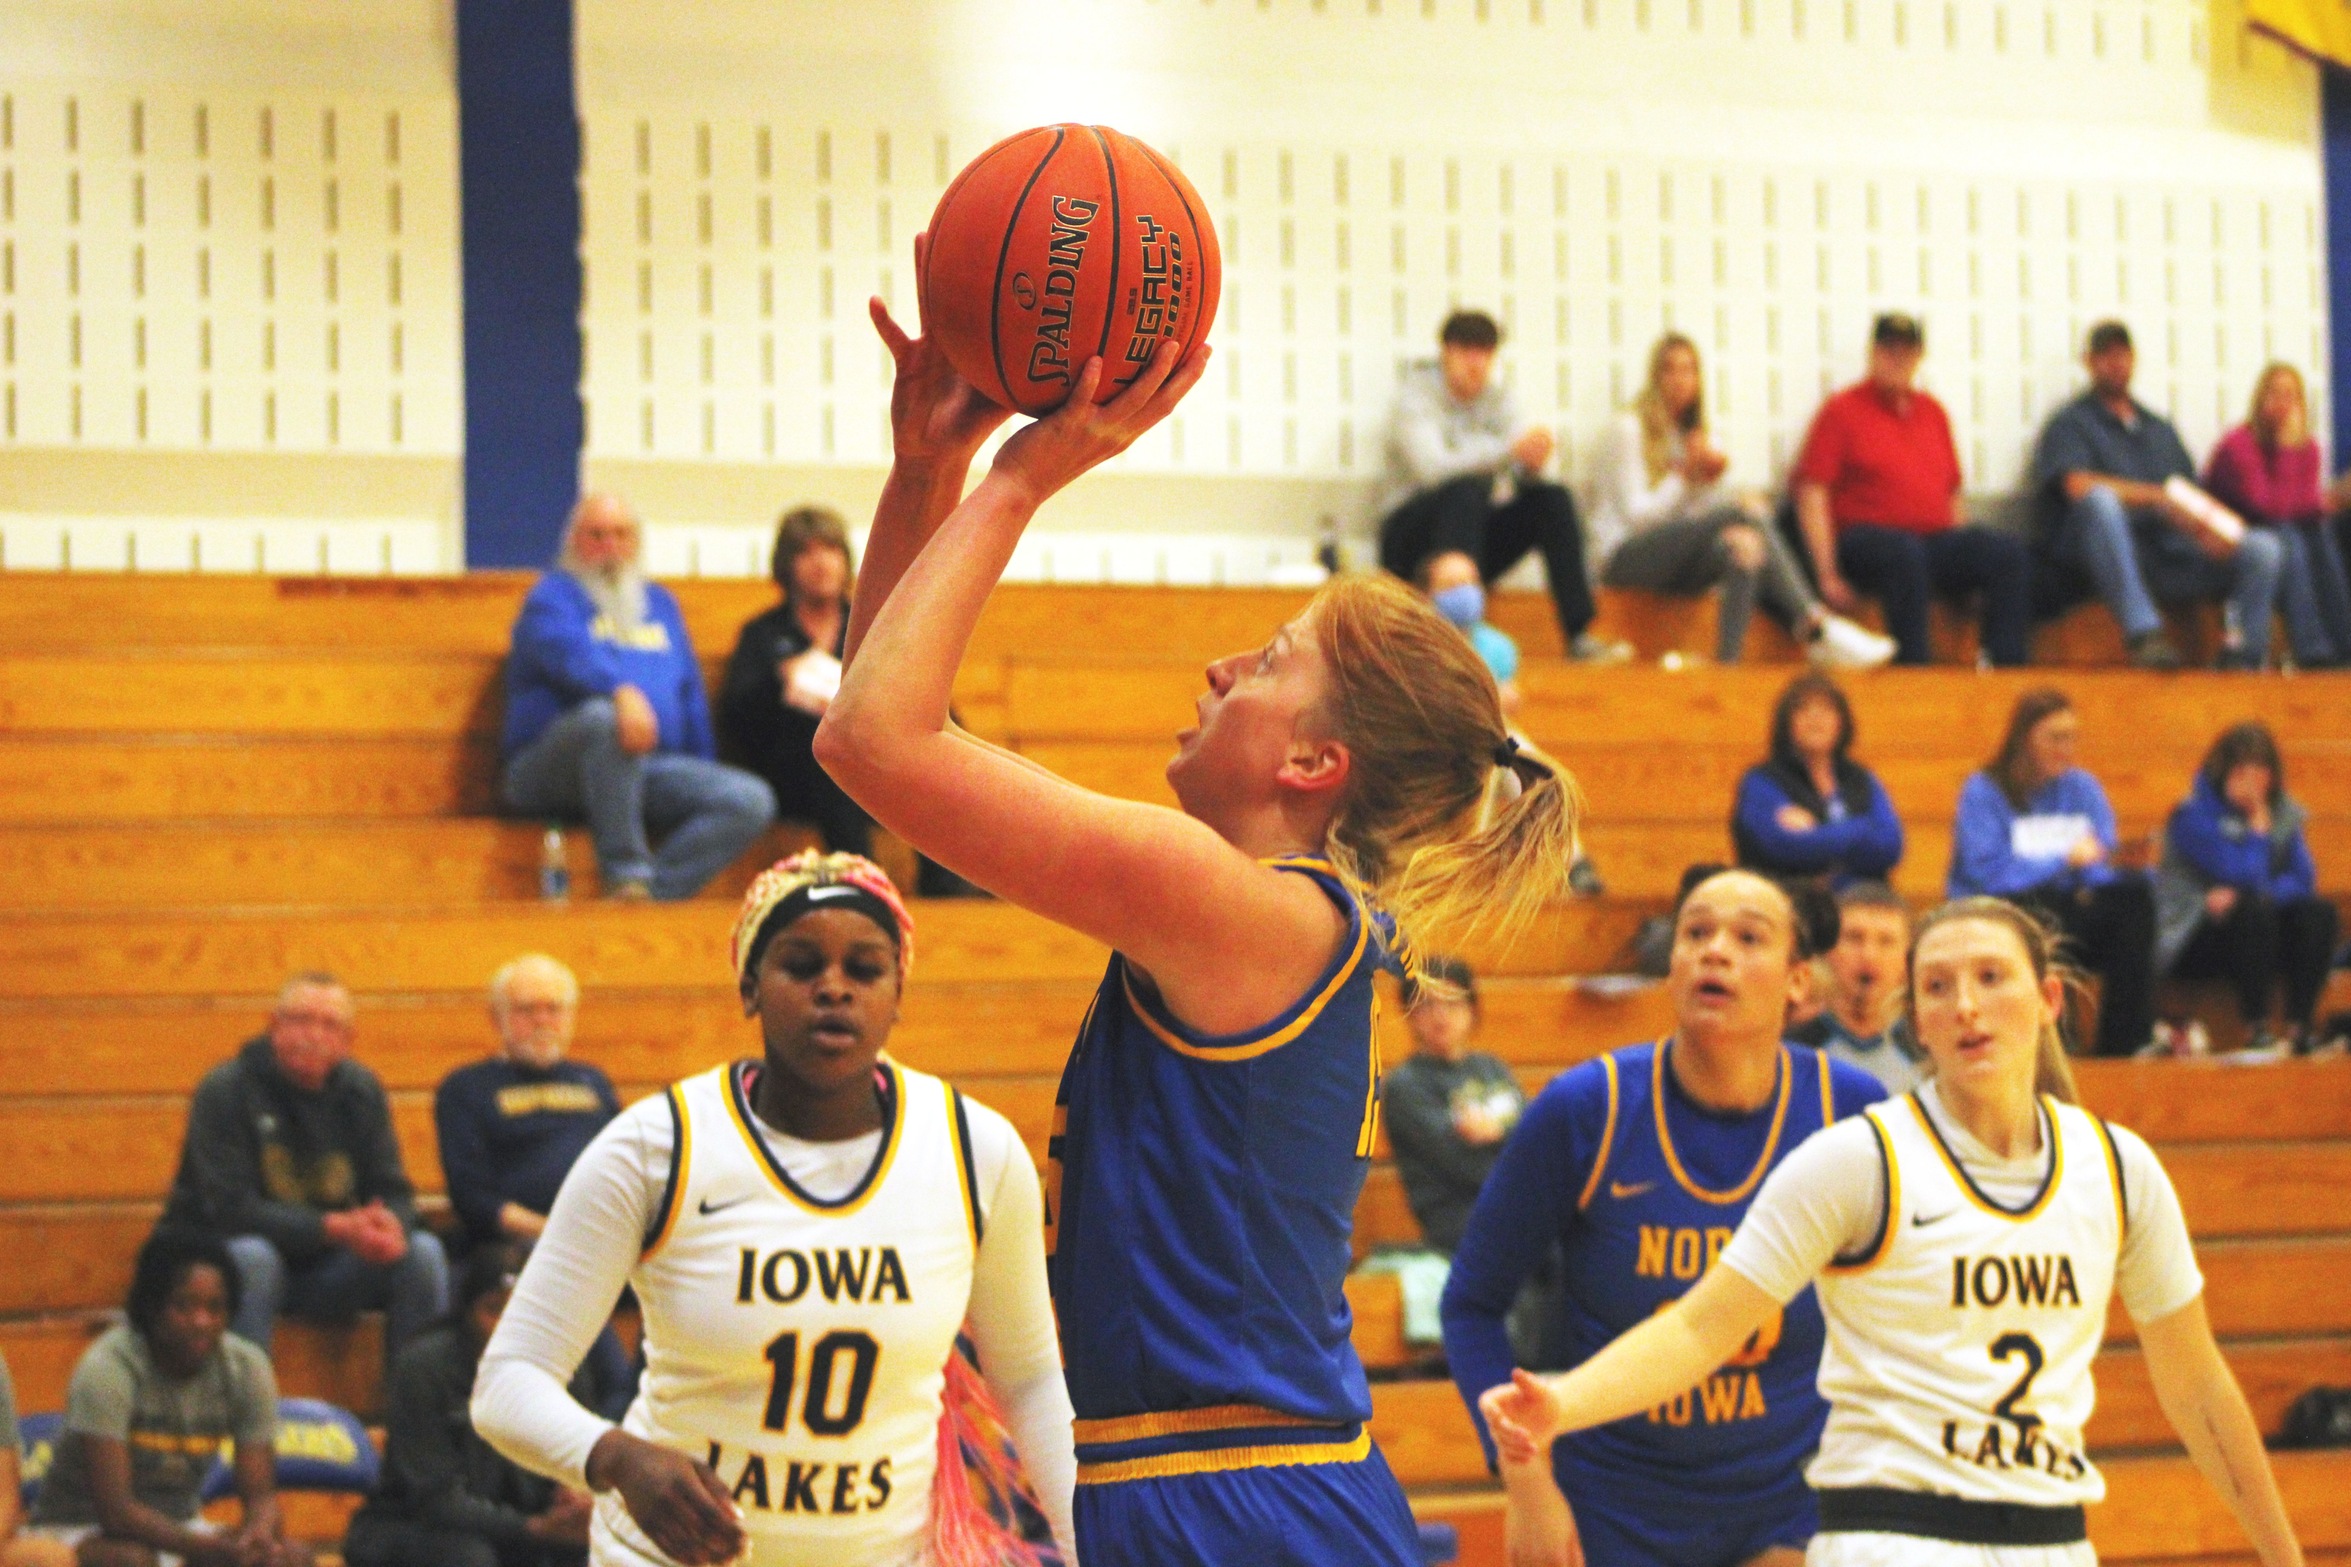 NIACC's Jackie Pippett scores on a layup in last season's regional tournament win over Iowa Lakes.